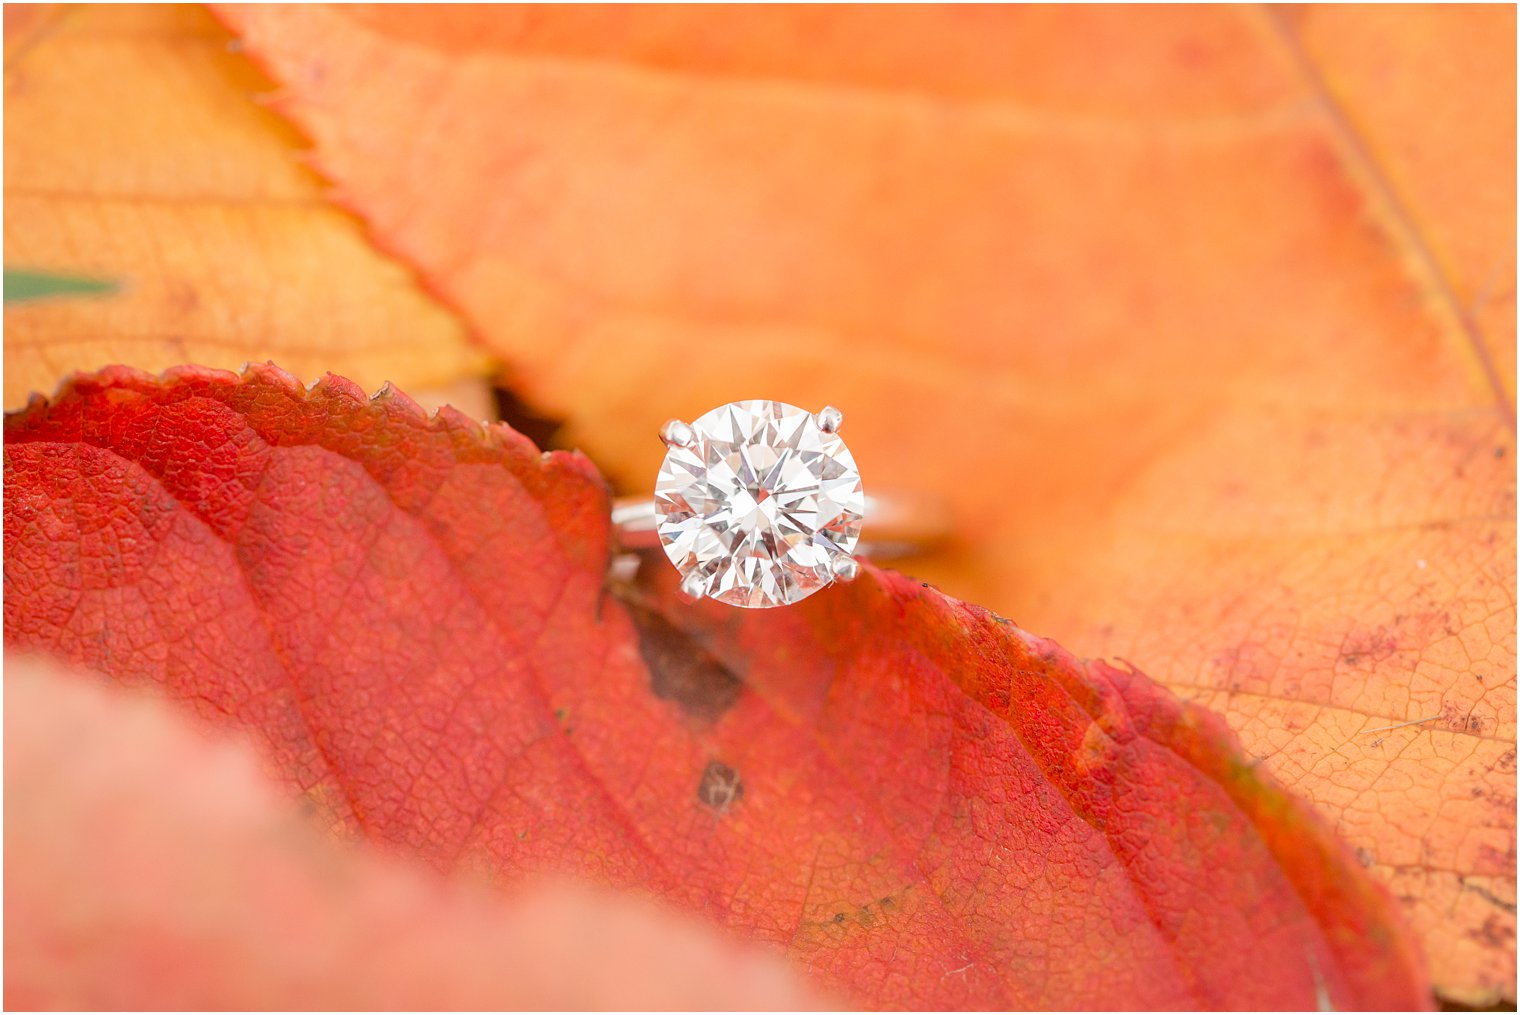 Engagement ring; diamond solitaire on an orange leaf